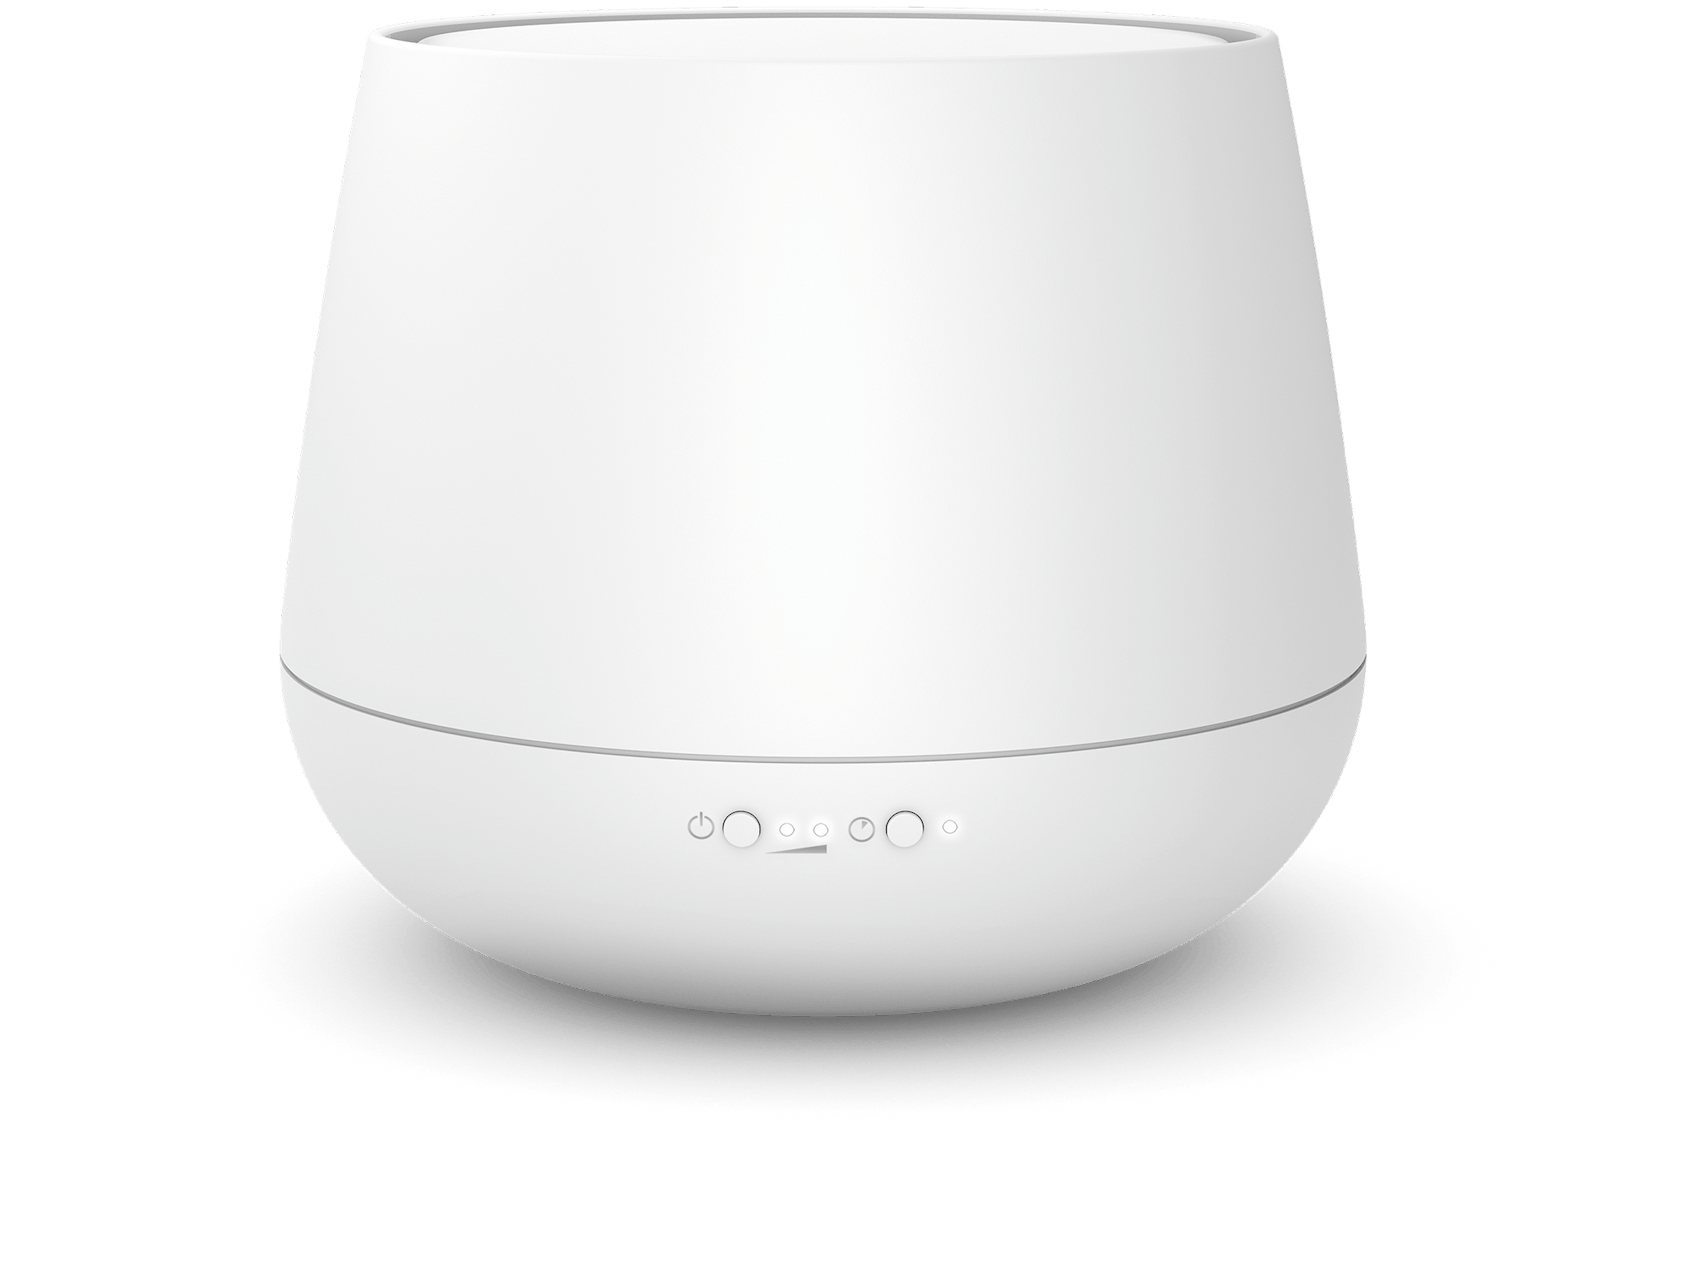 Julia aroma diffuser by Stadler Form in white as front view